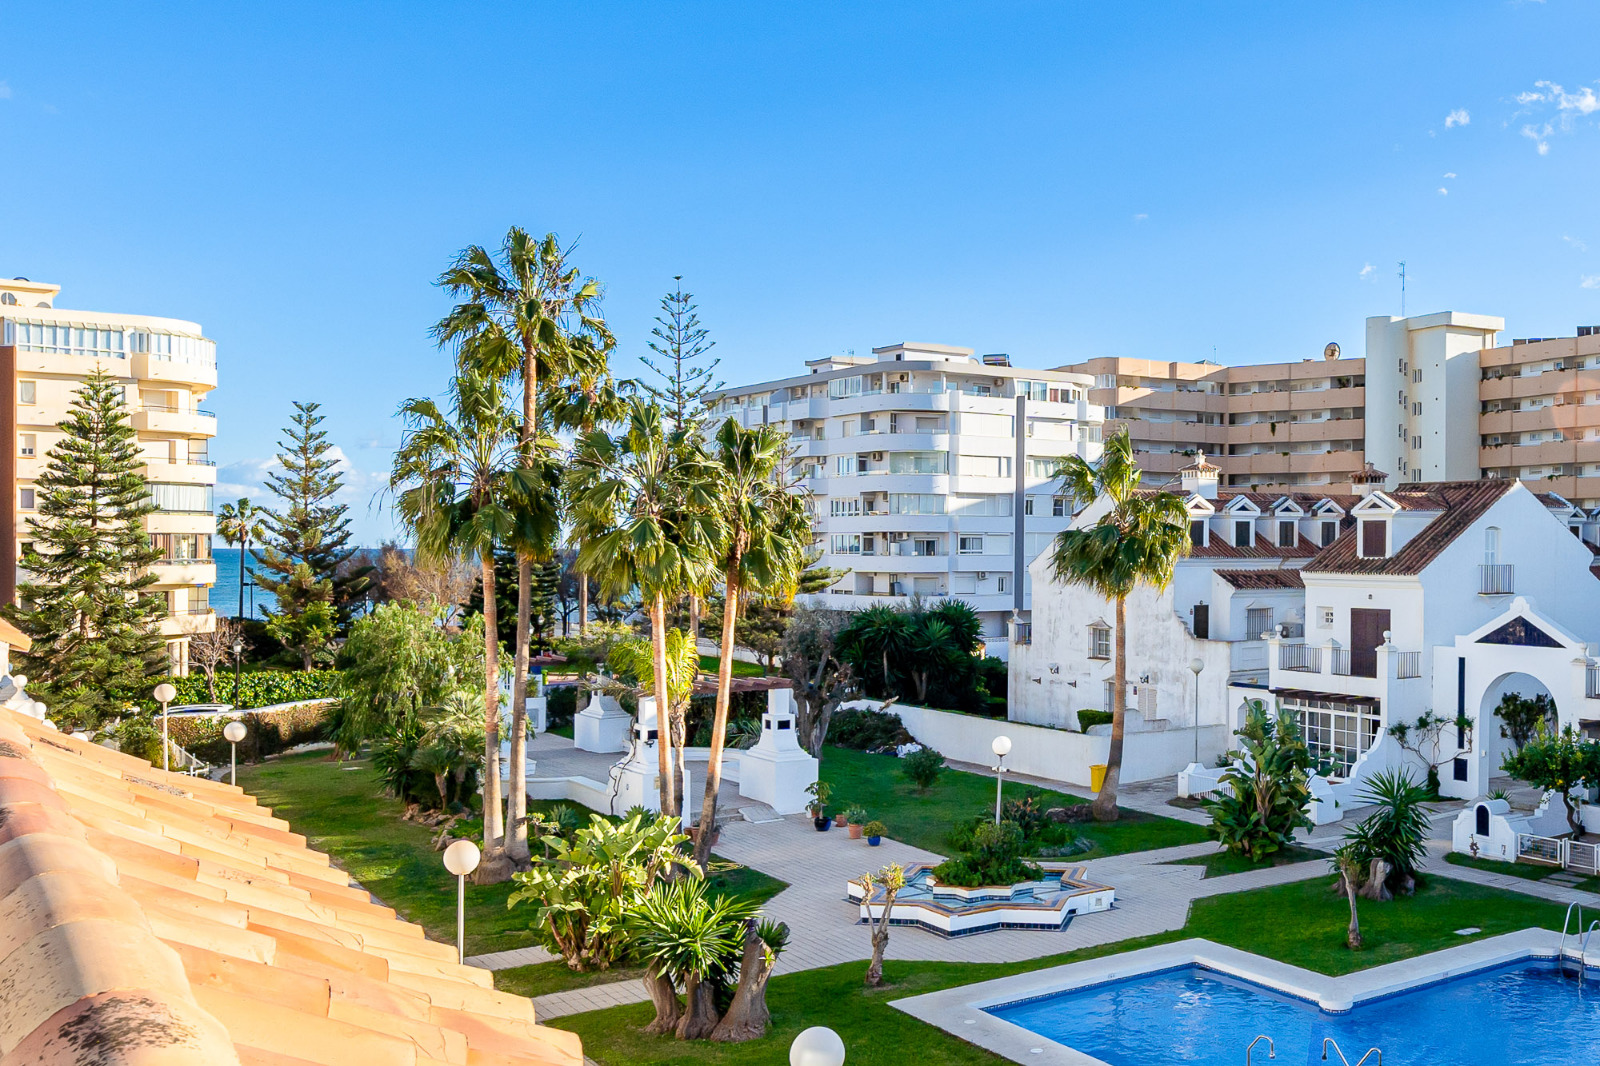 Malaga the best city to live in